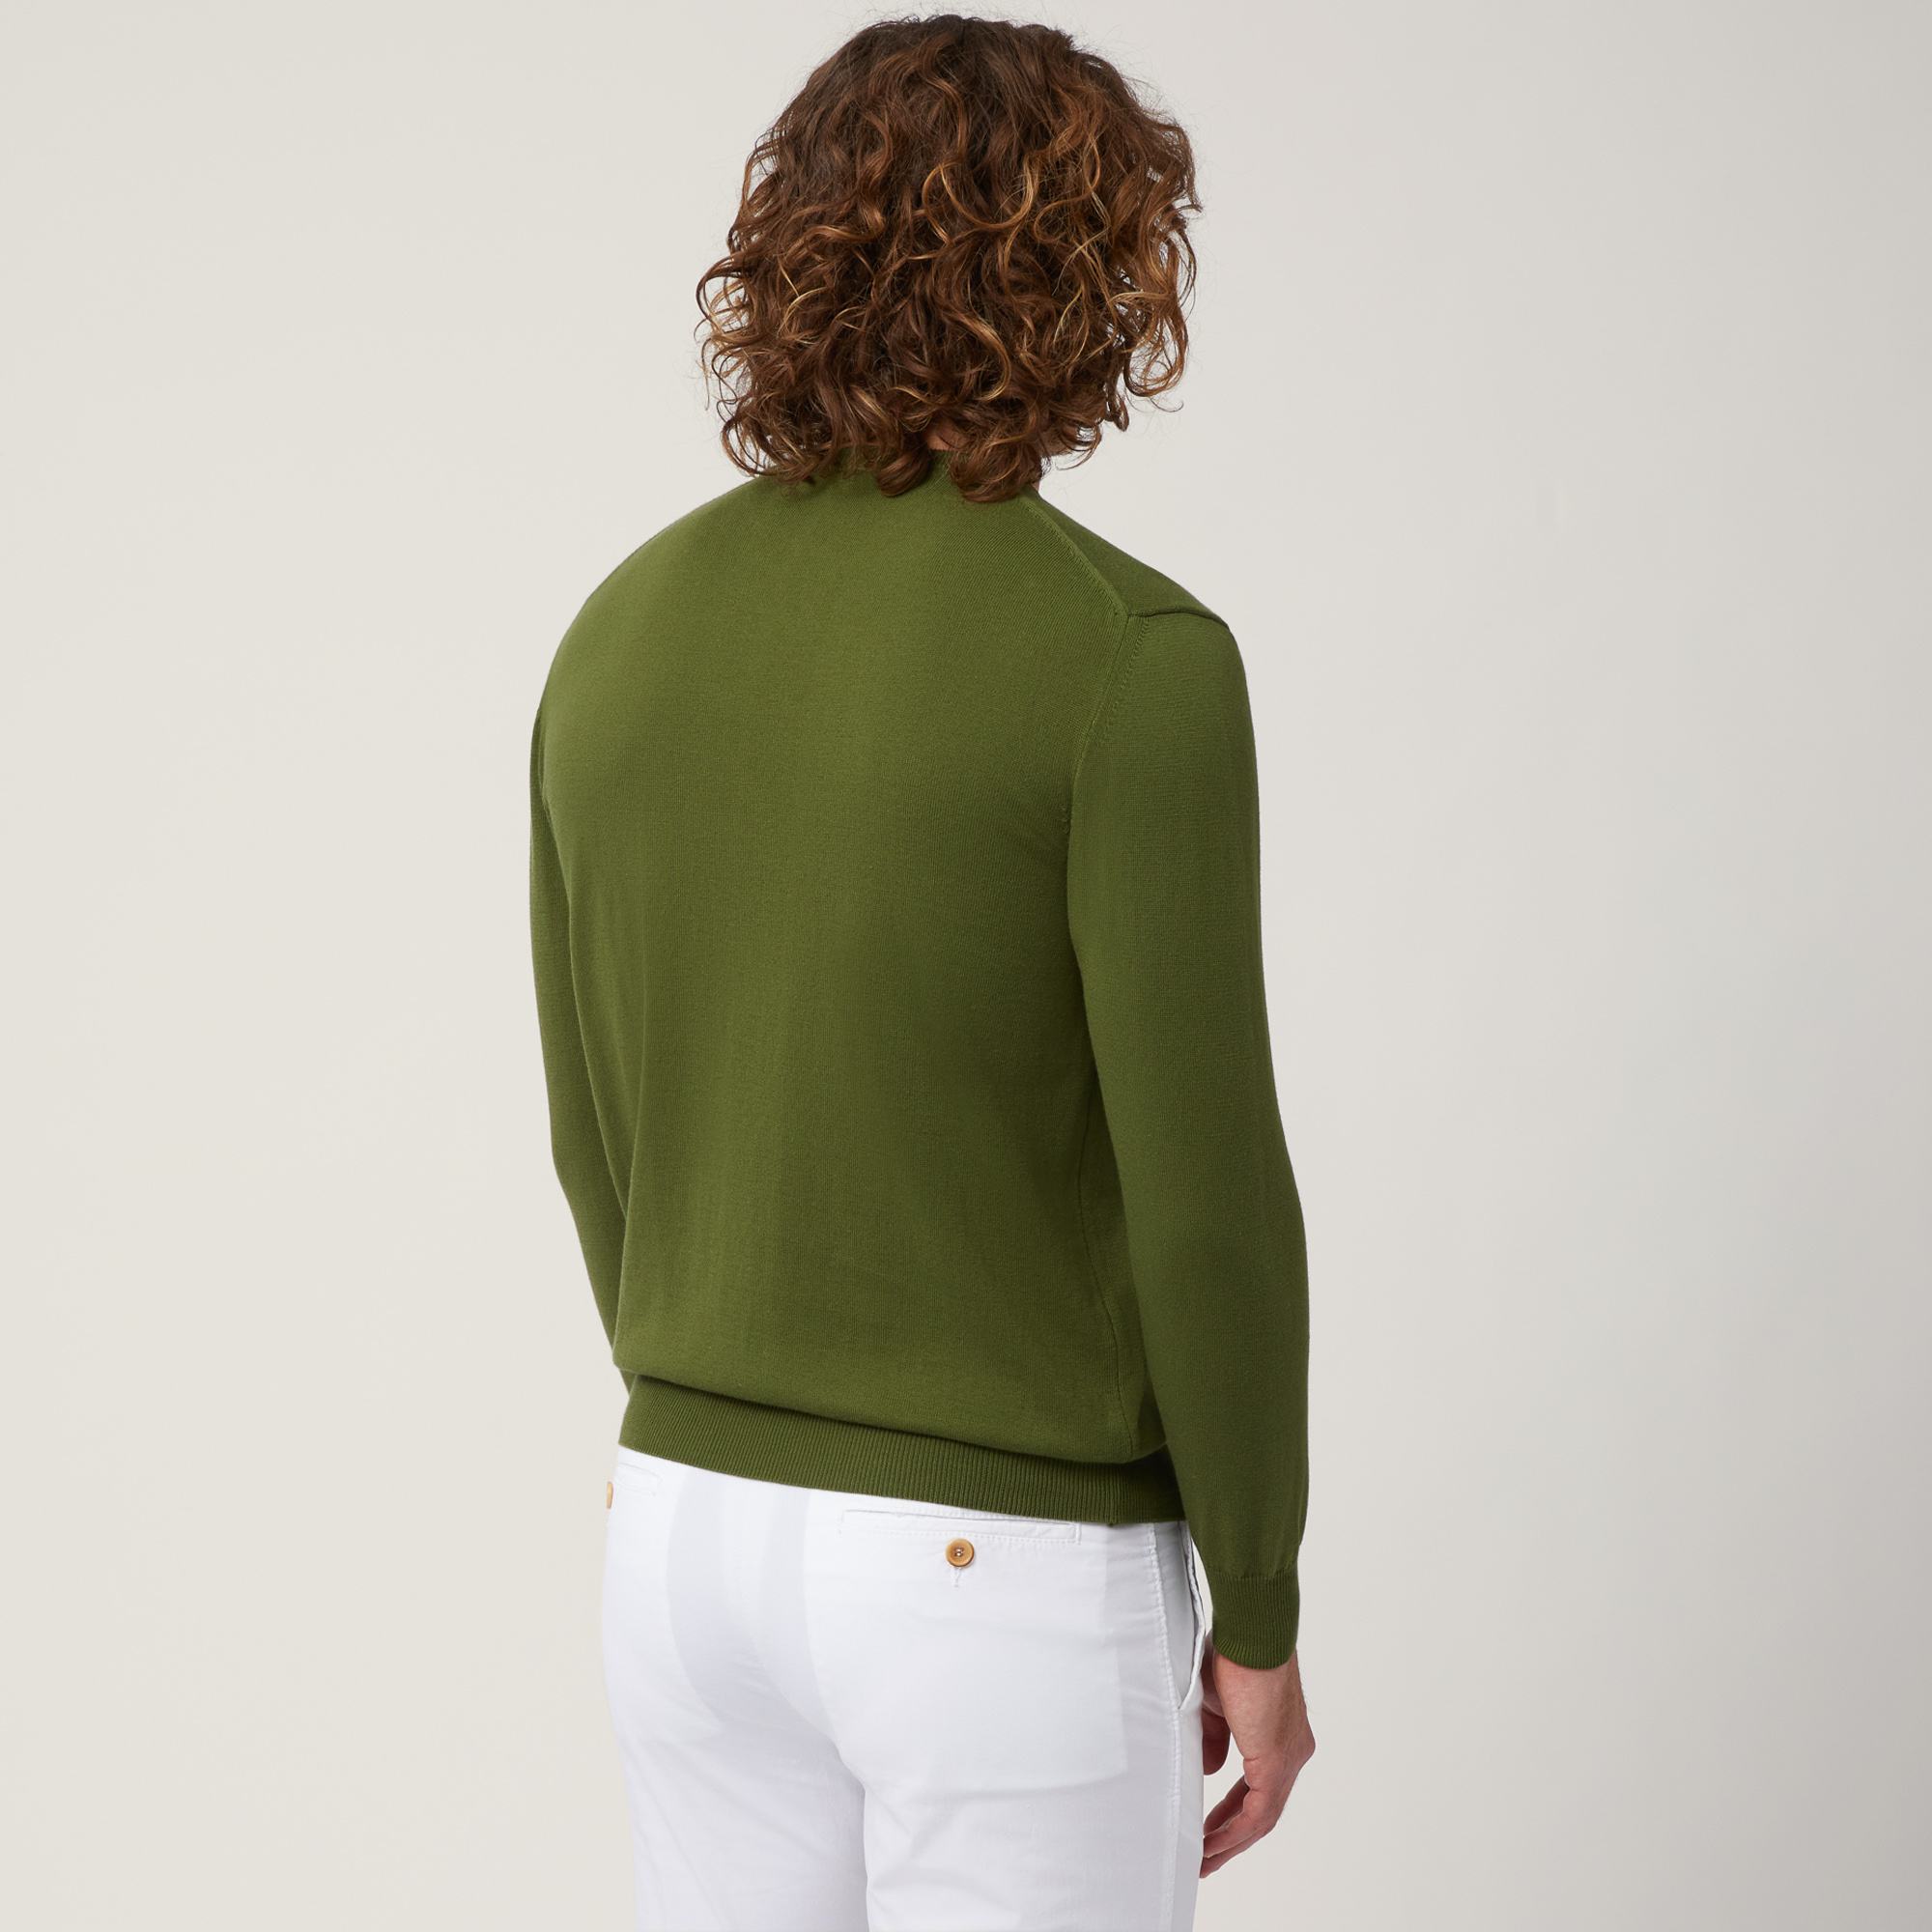 Pullover Girocollo In Cotone, Verde, large image number 1